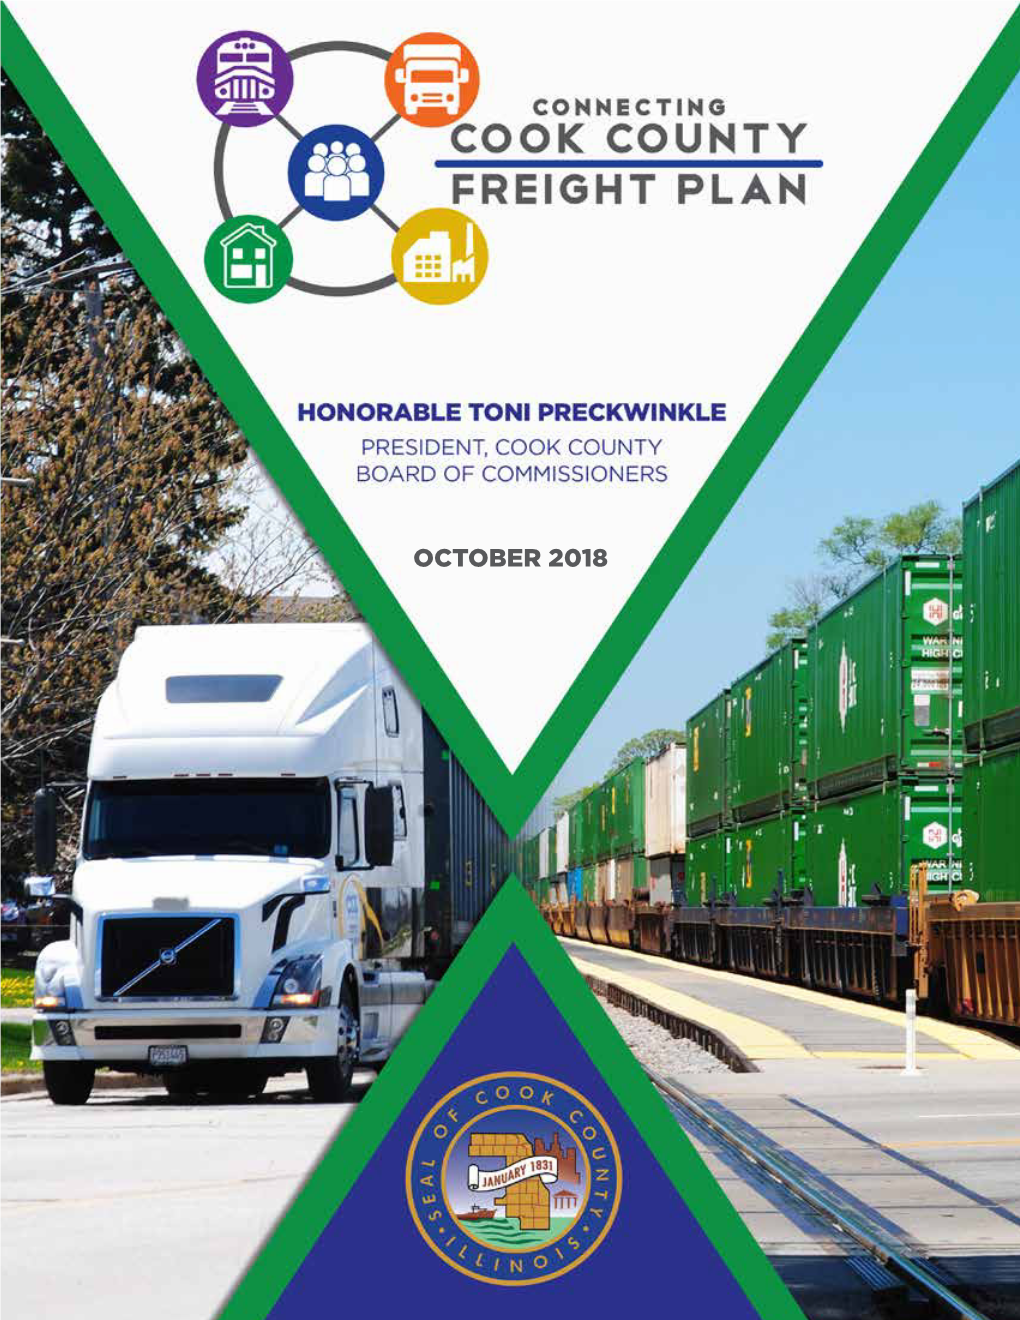 The Freight Plan